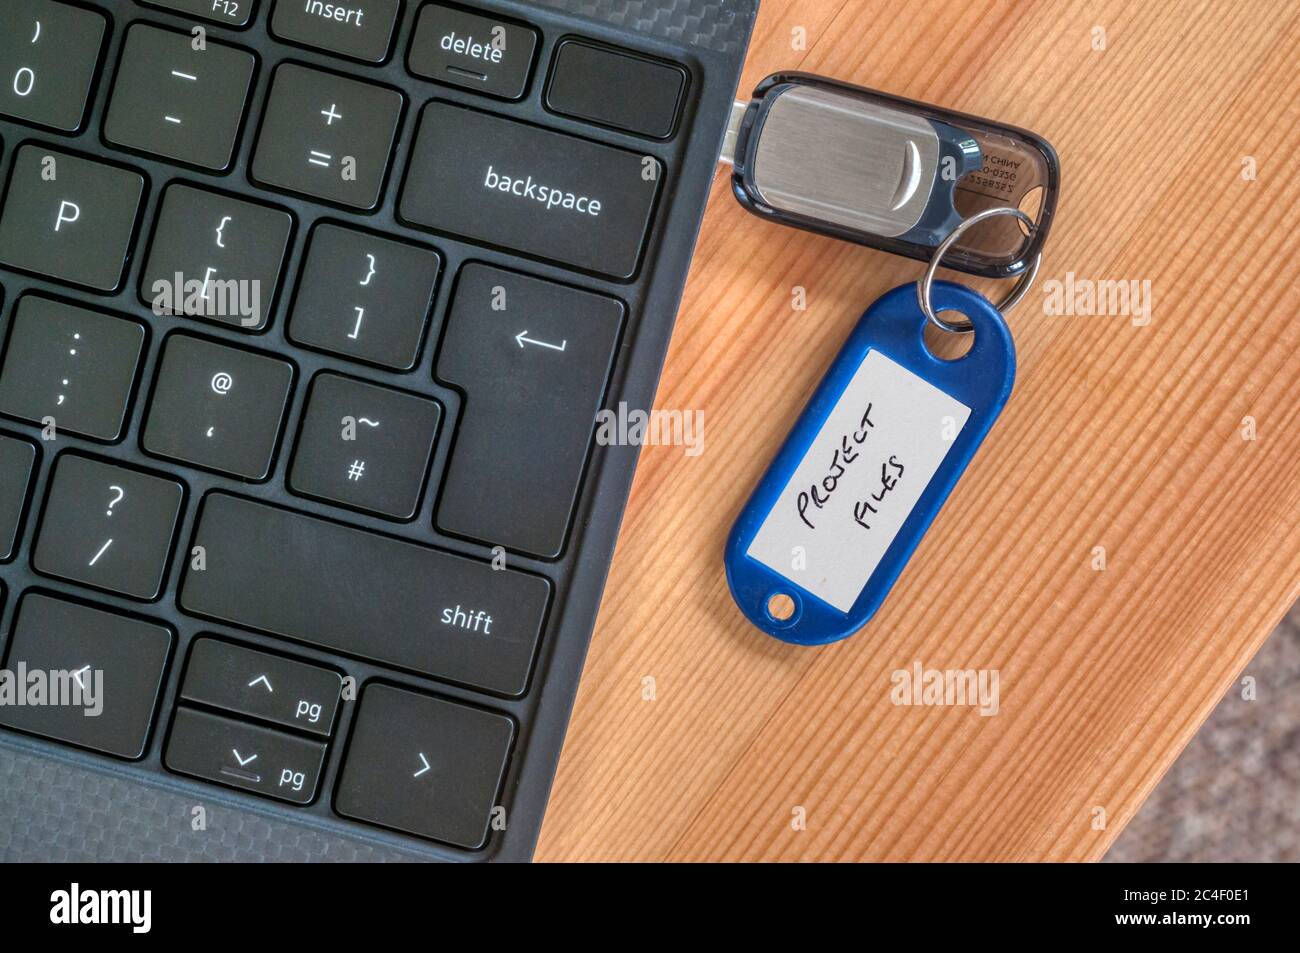 Project files stored on a USB stick in the side of a laptop computer. Stock Photo